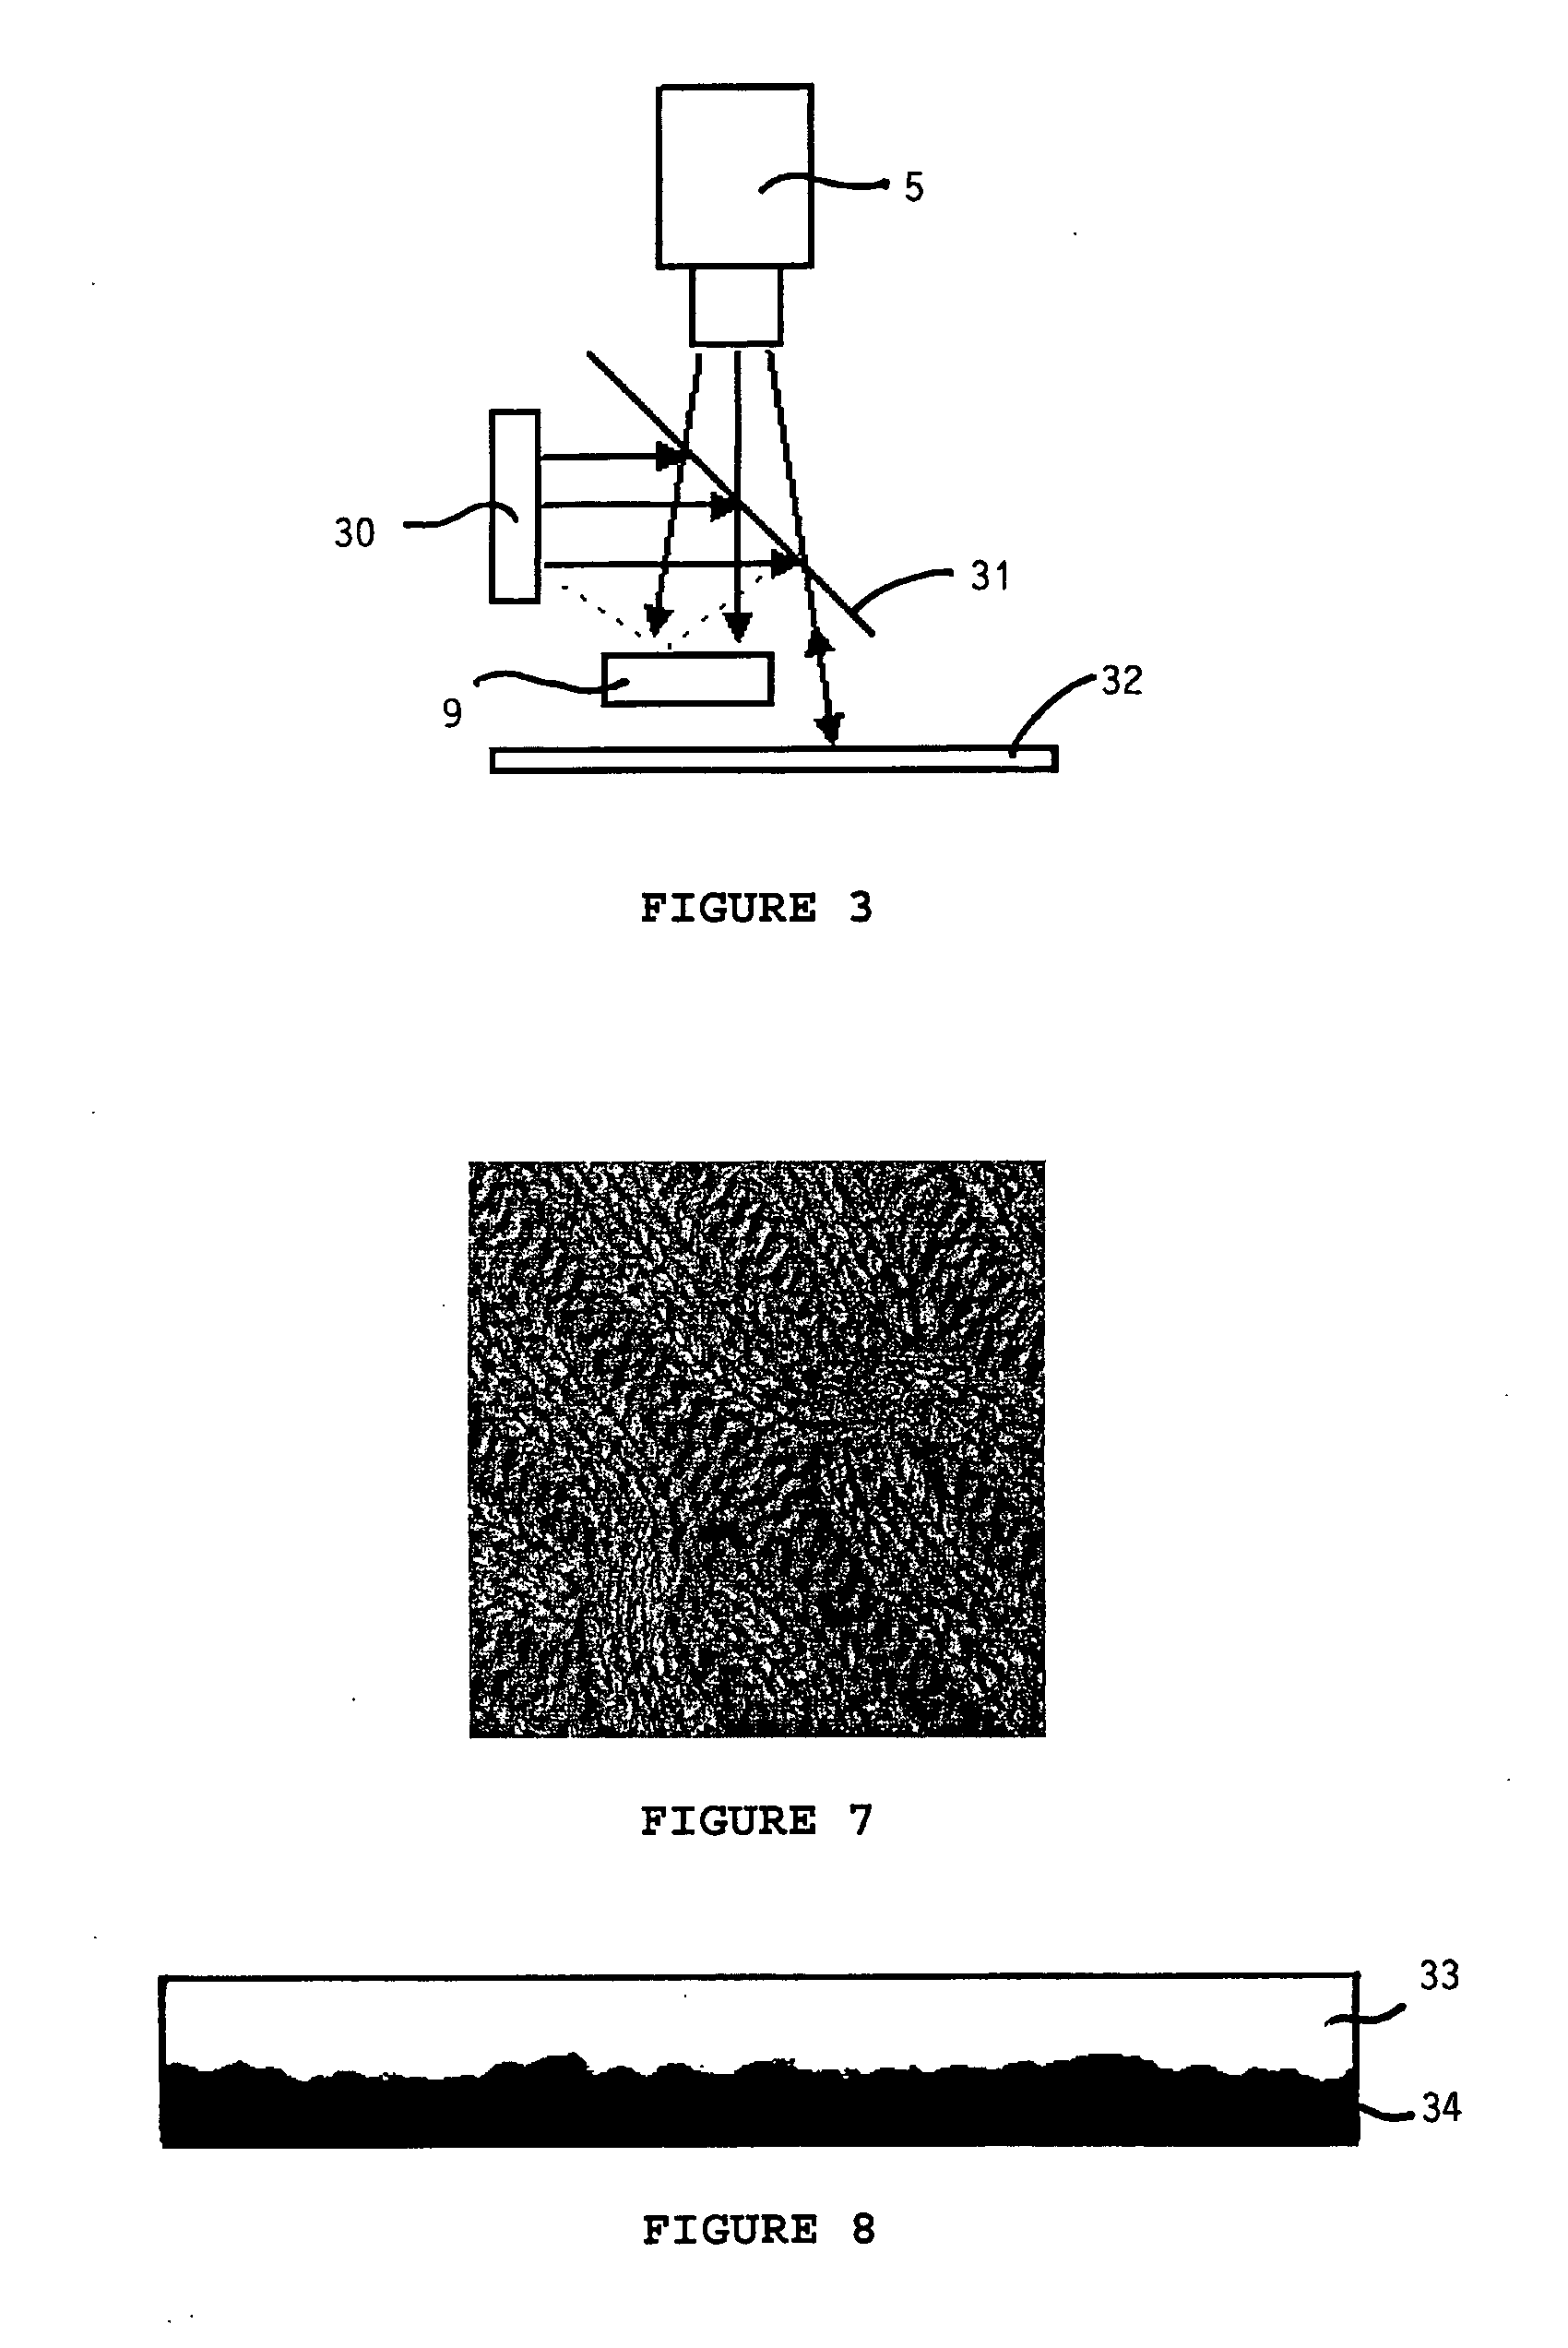 System and method for the three-dimensional analysis and reconstruction of the surface of a thin flexible material